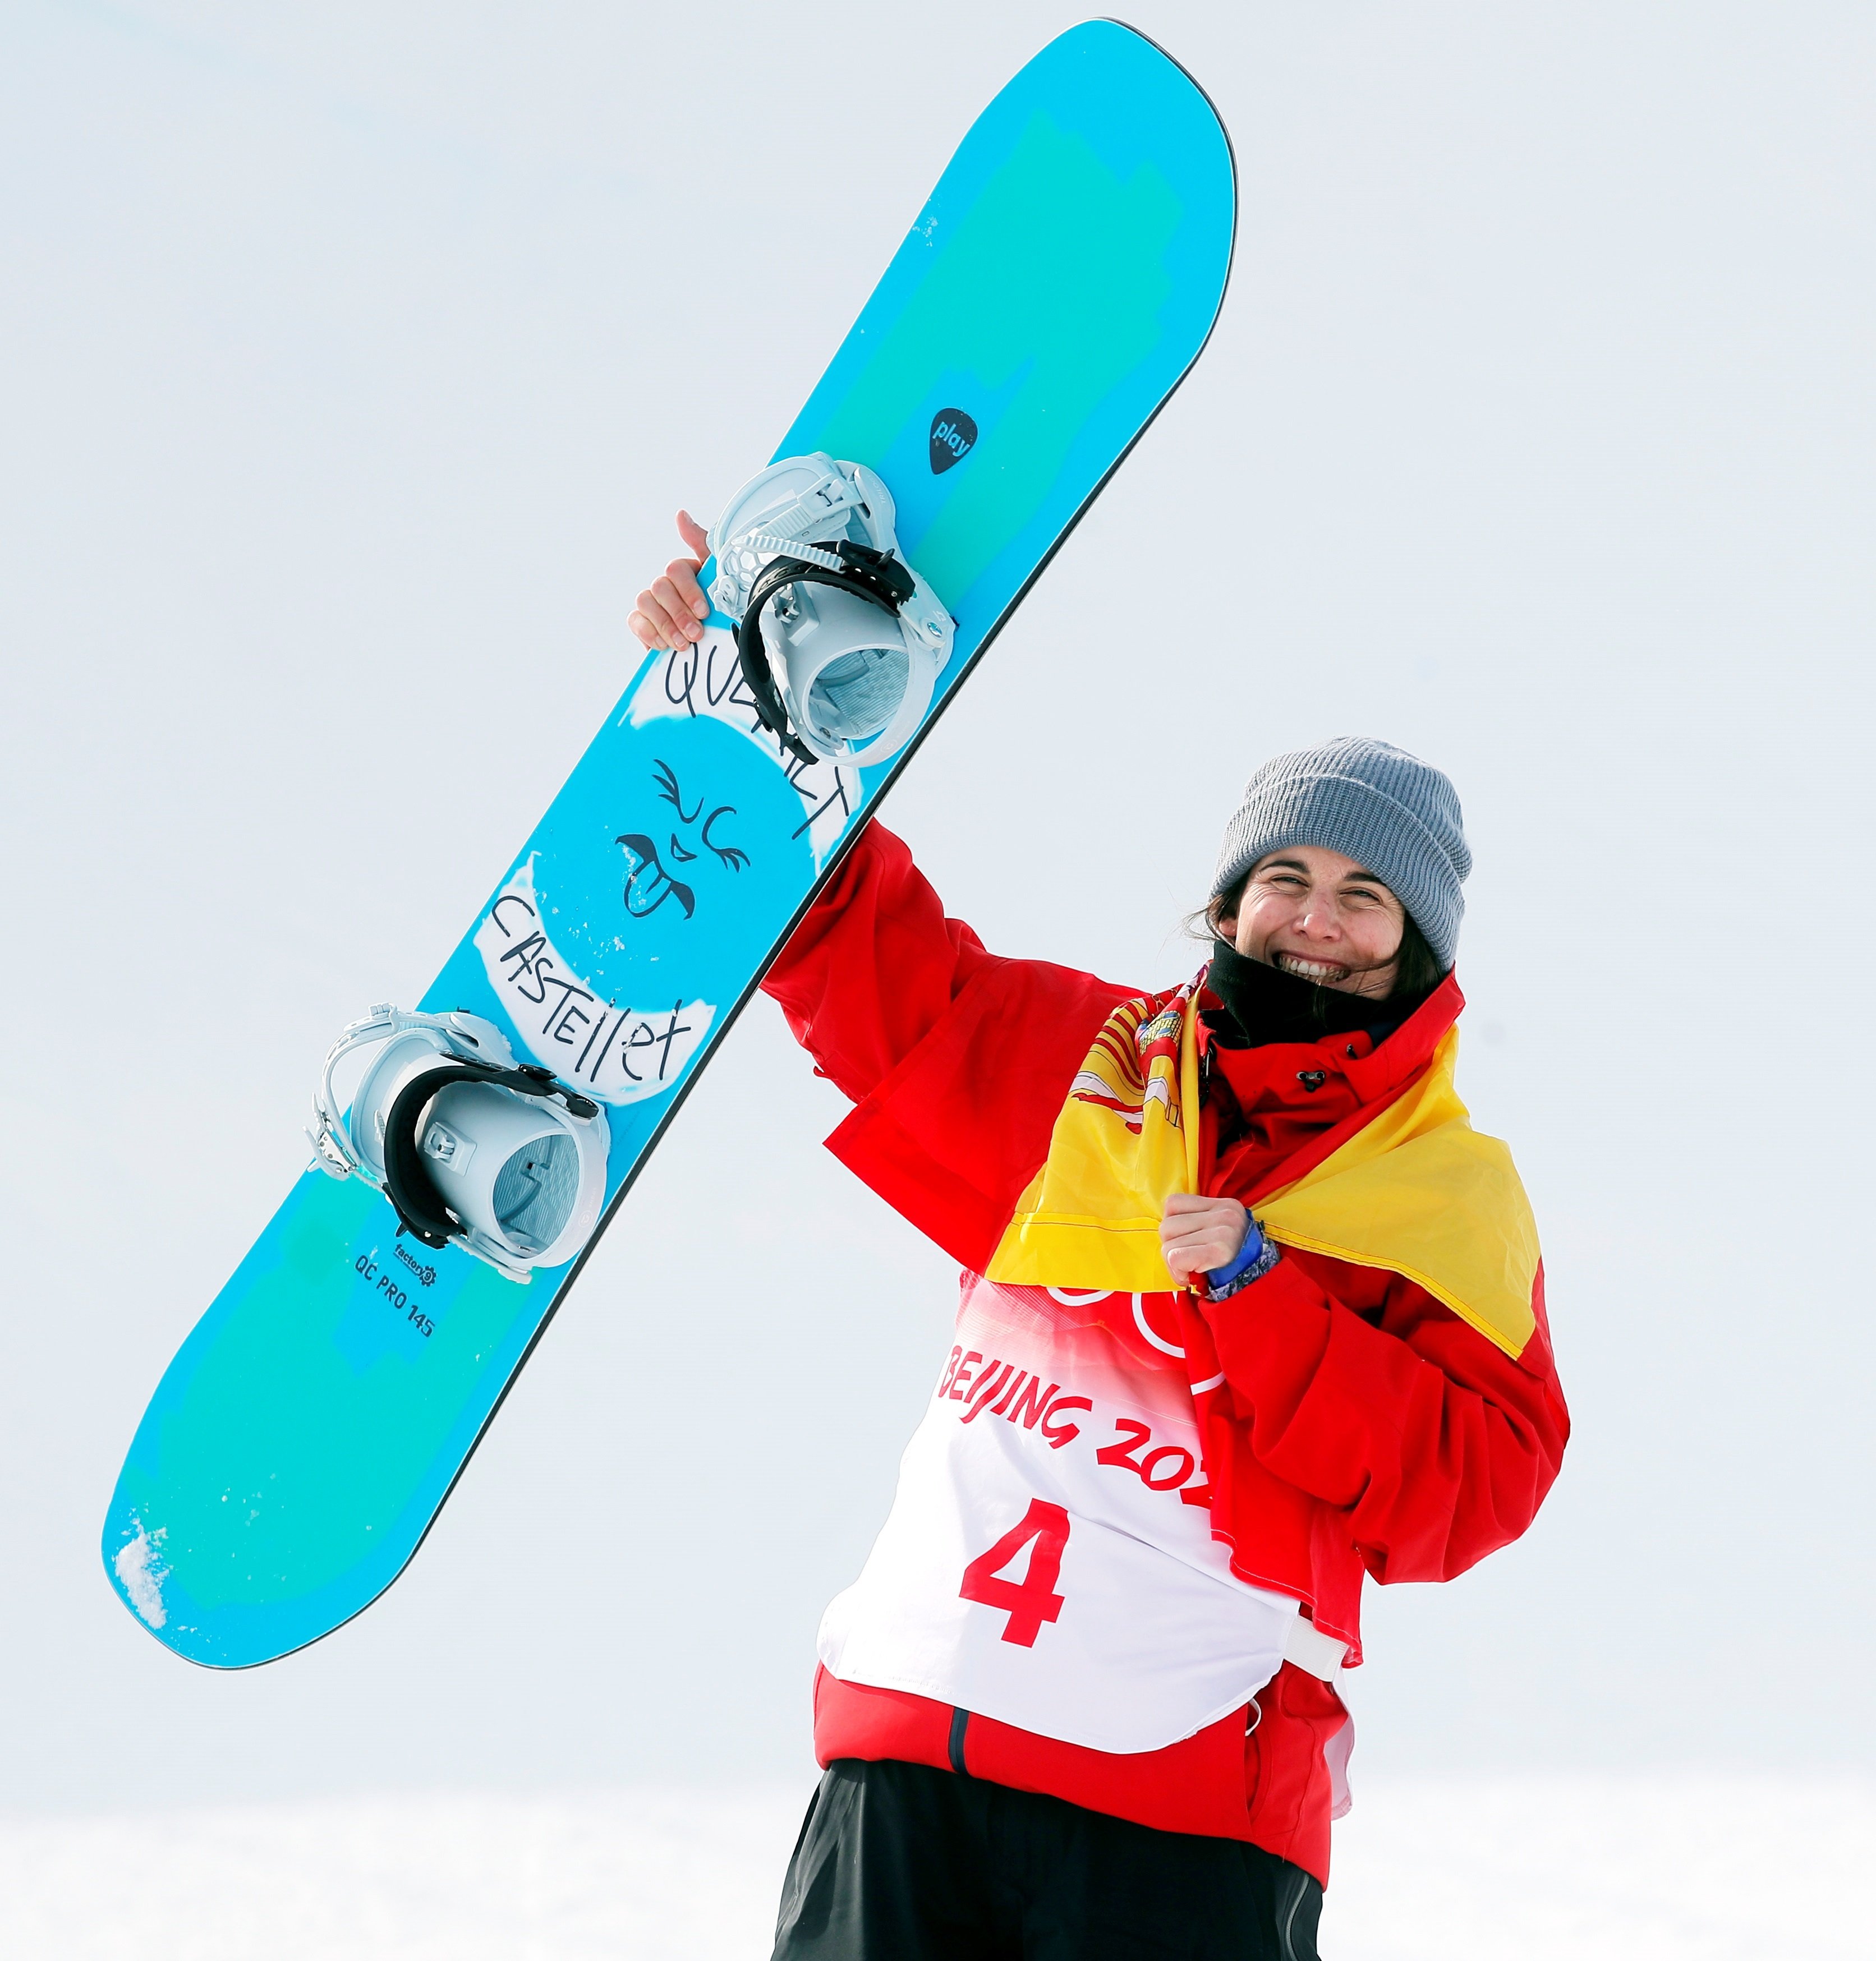 Snowboarder Queralt Castellet wins silver: Catalonia's first Winter Olympic medal